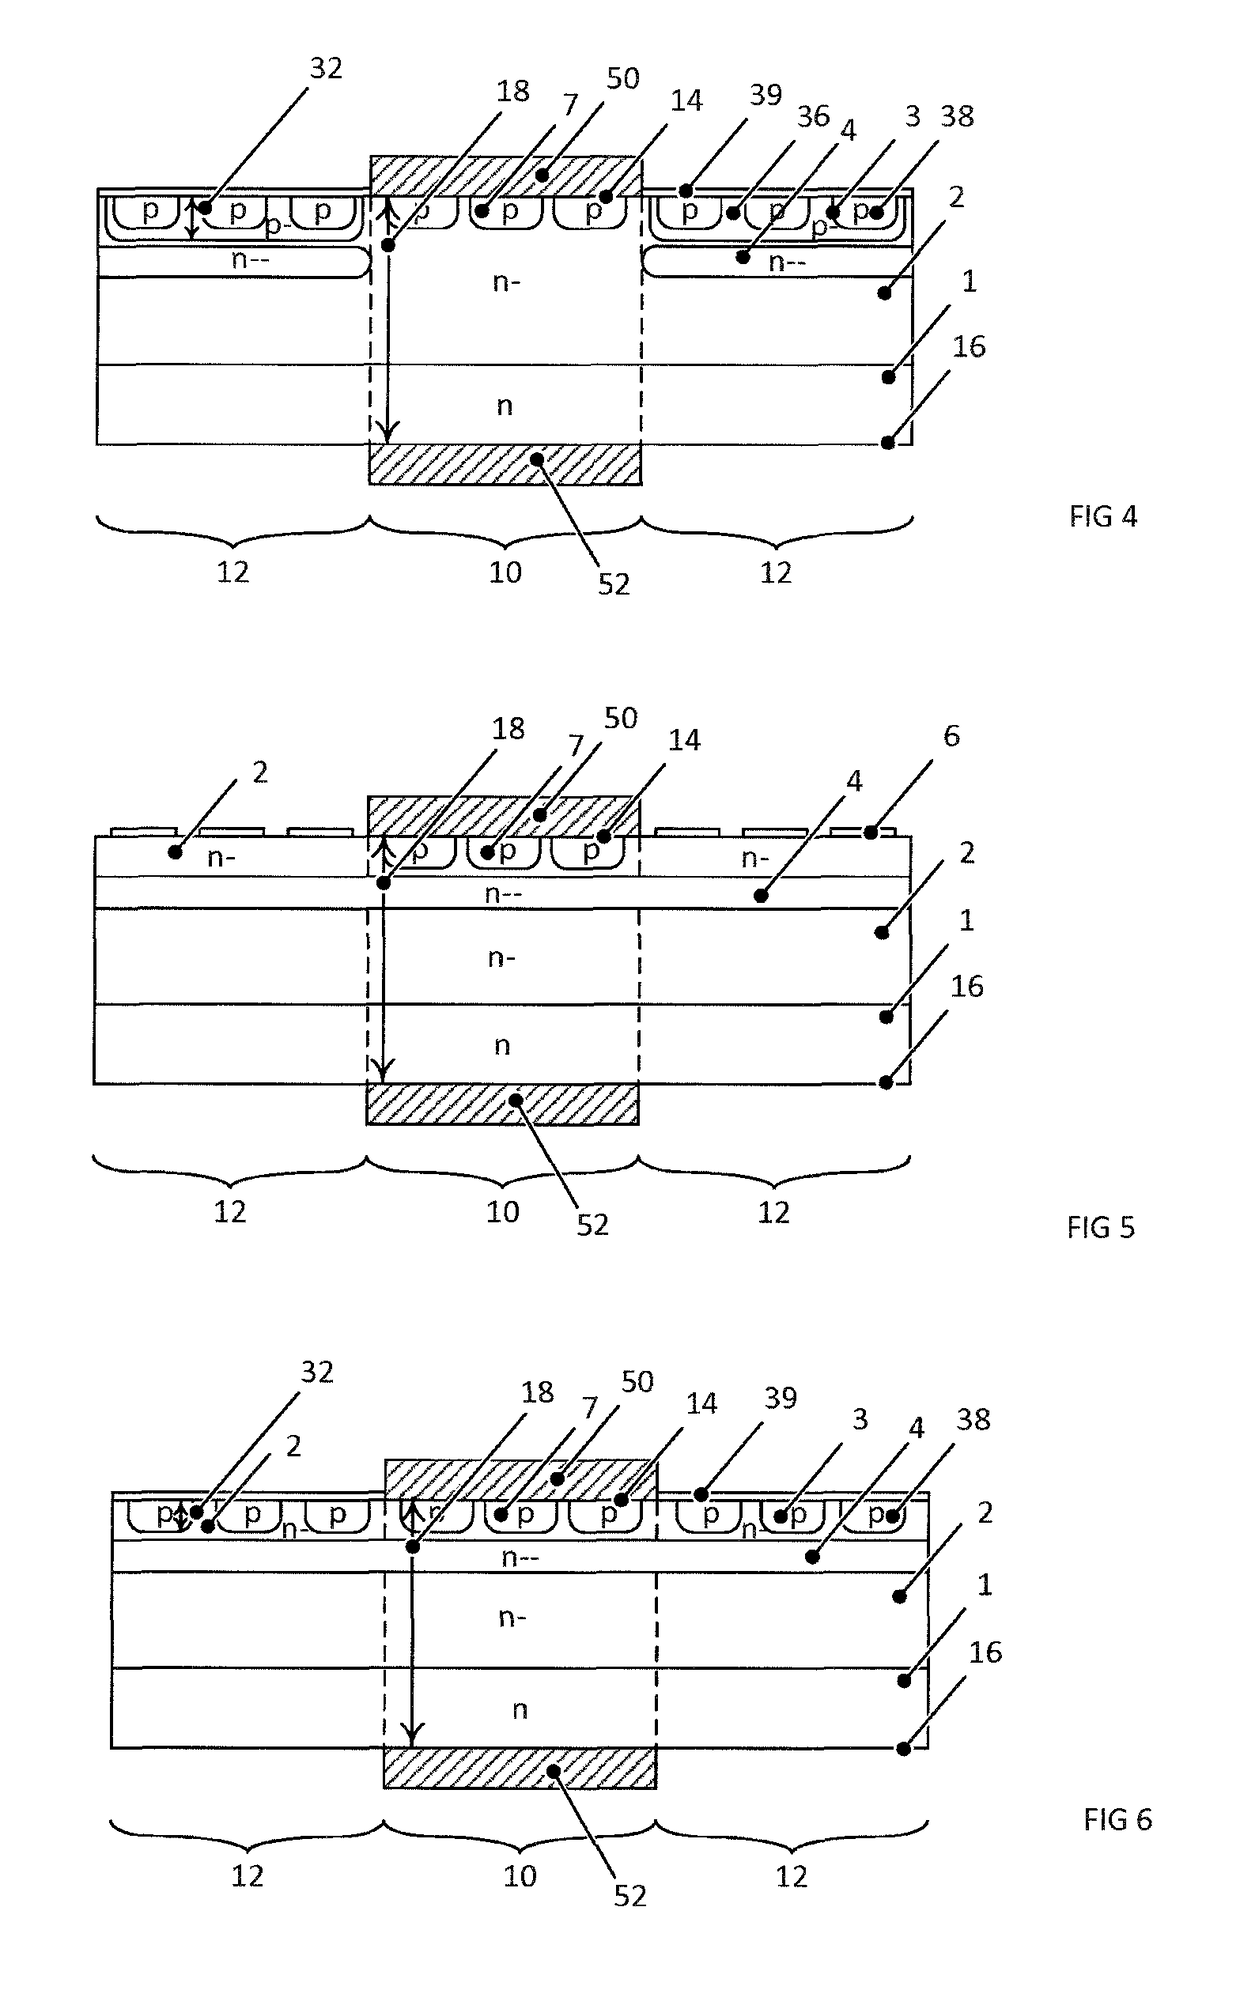 Method for manufacturing an edge termination for a silicon carbide power semiconductor device